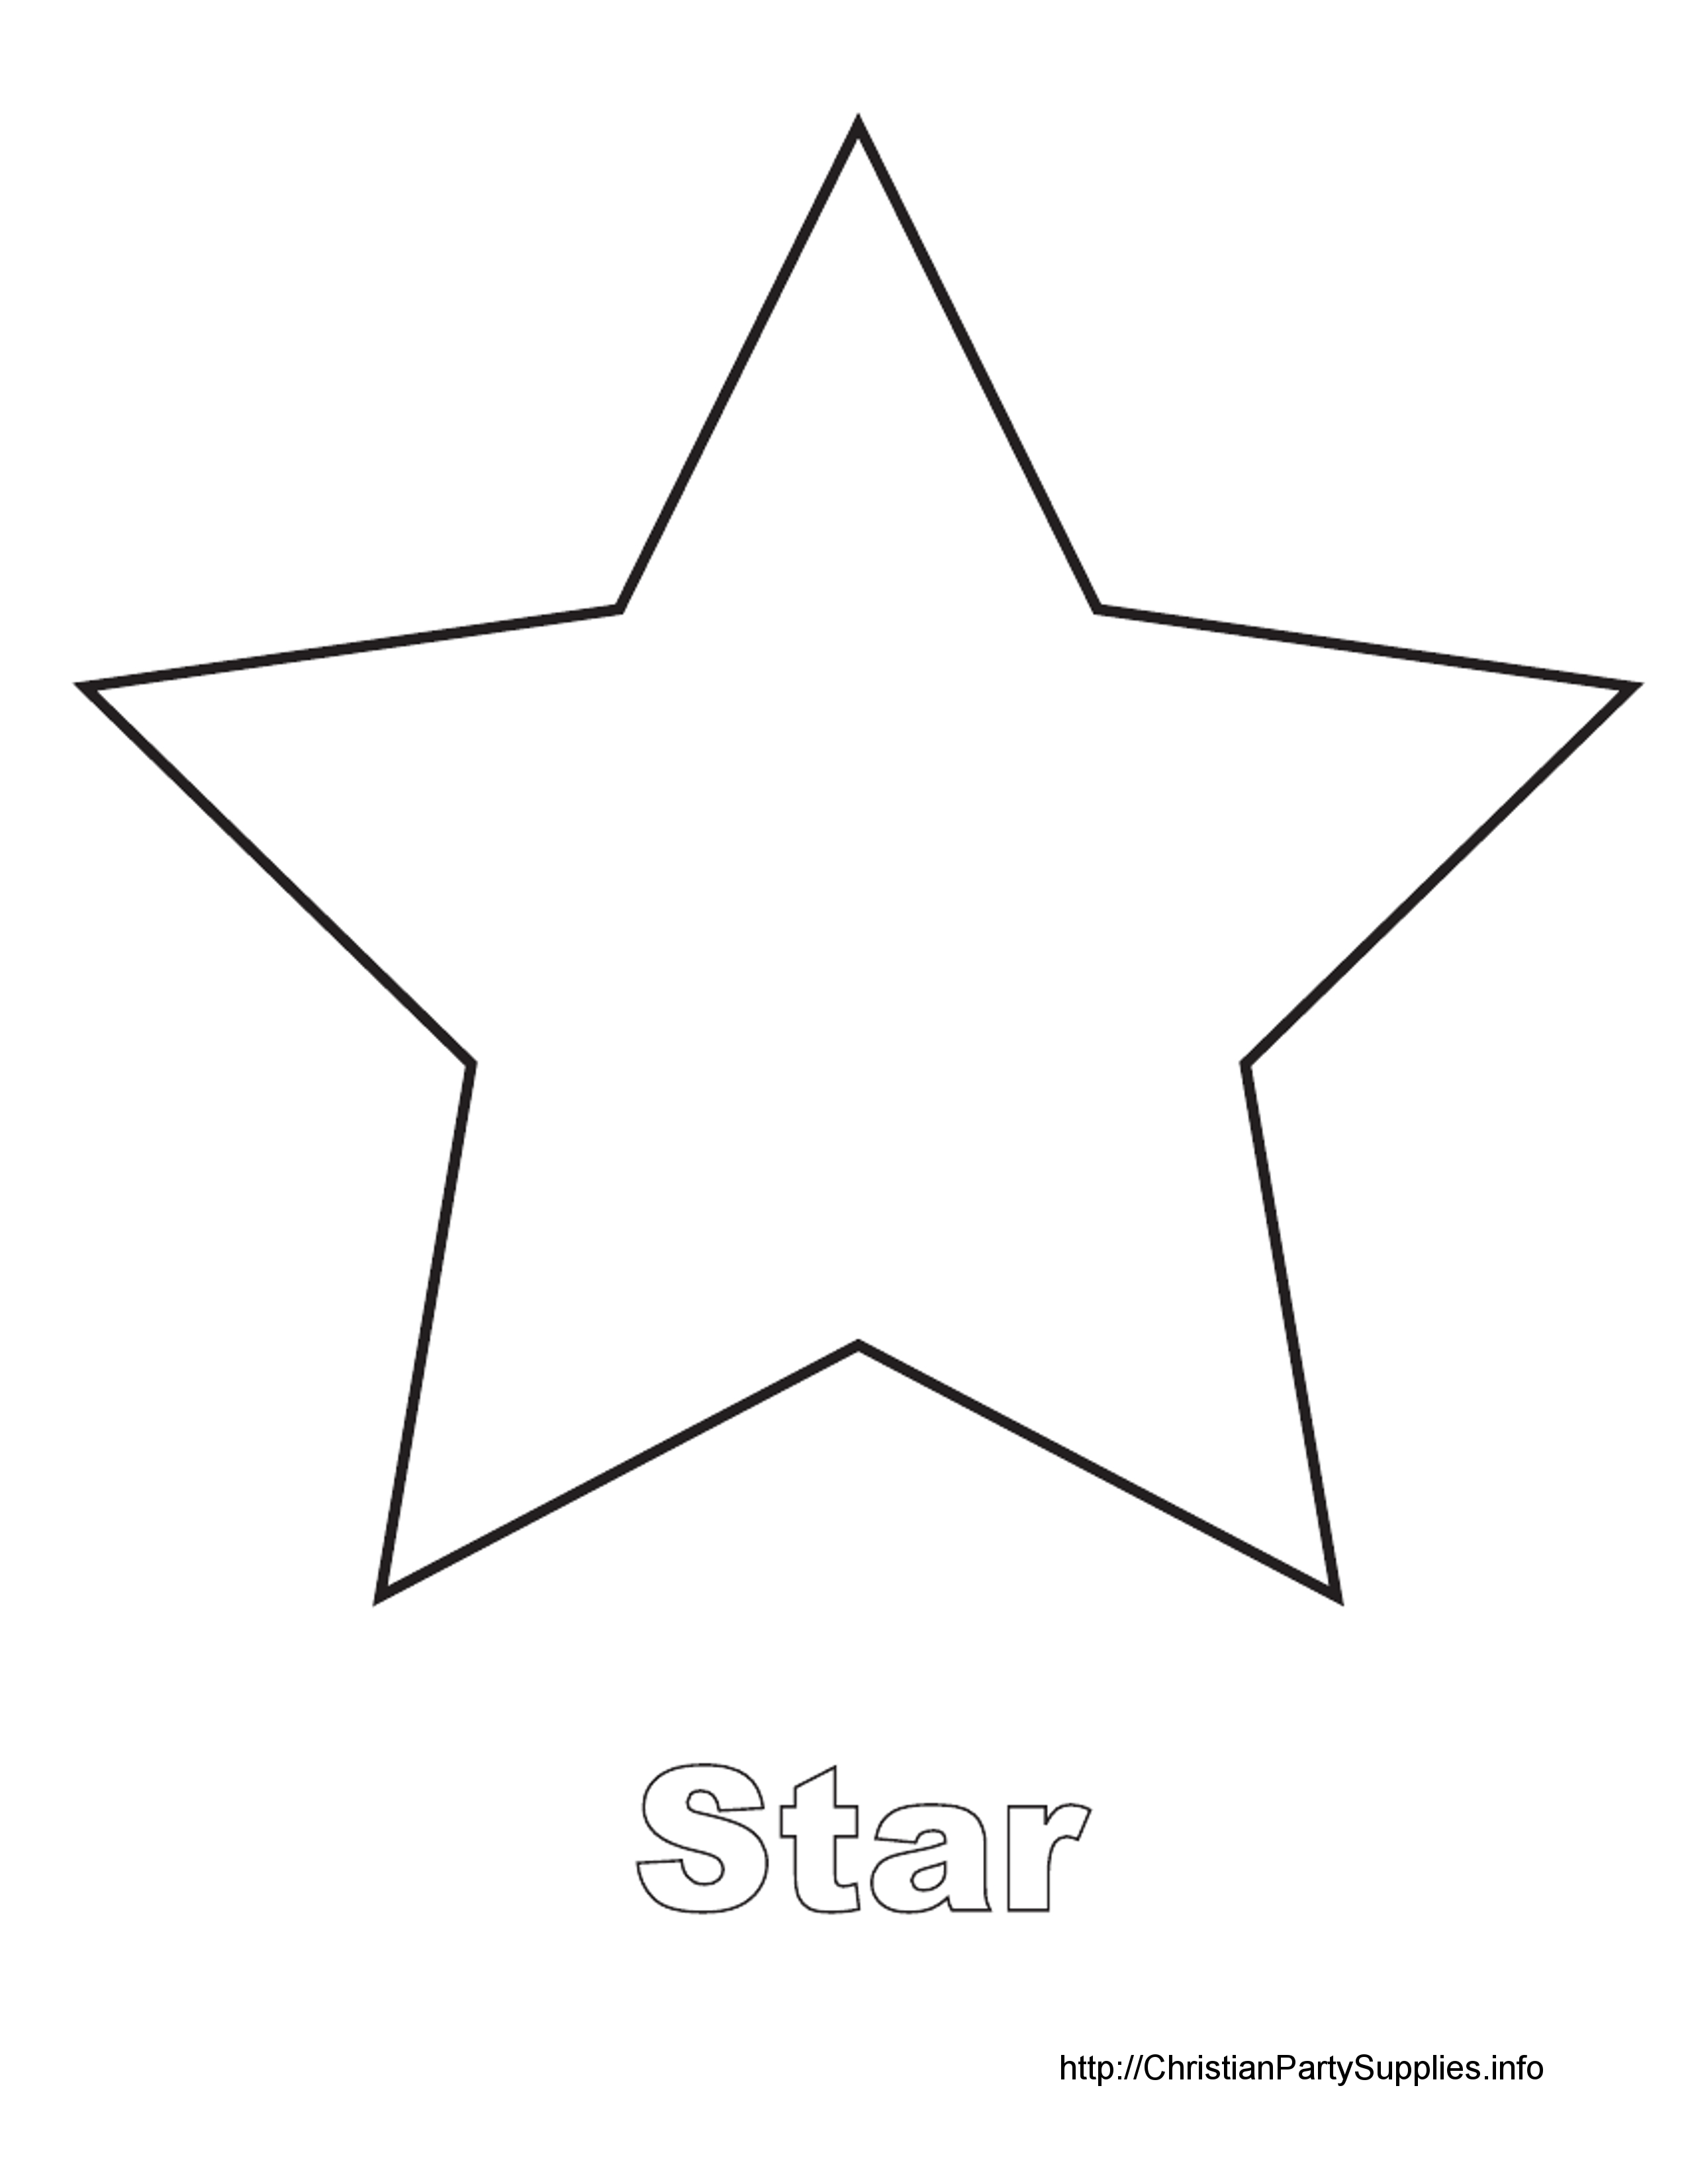 4 Best Images of Star Cutouts Printable Printable Christmas Tree Star